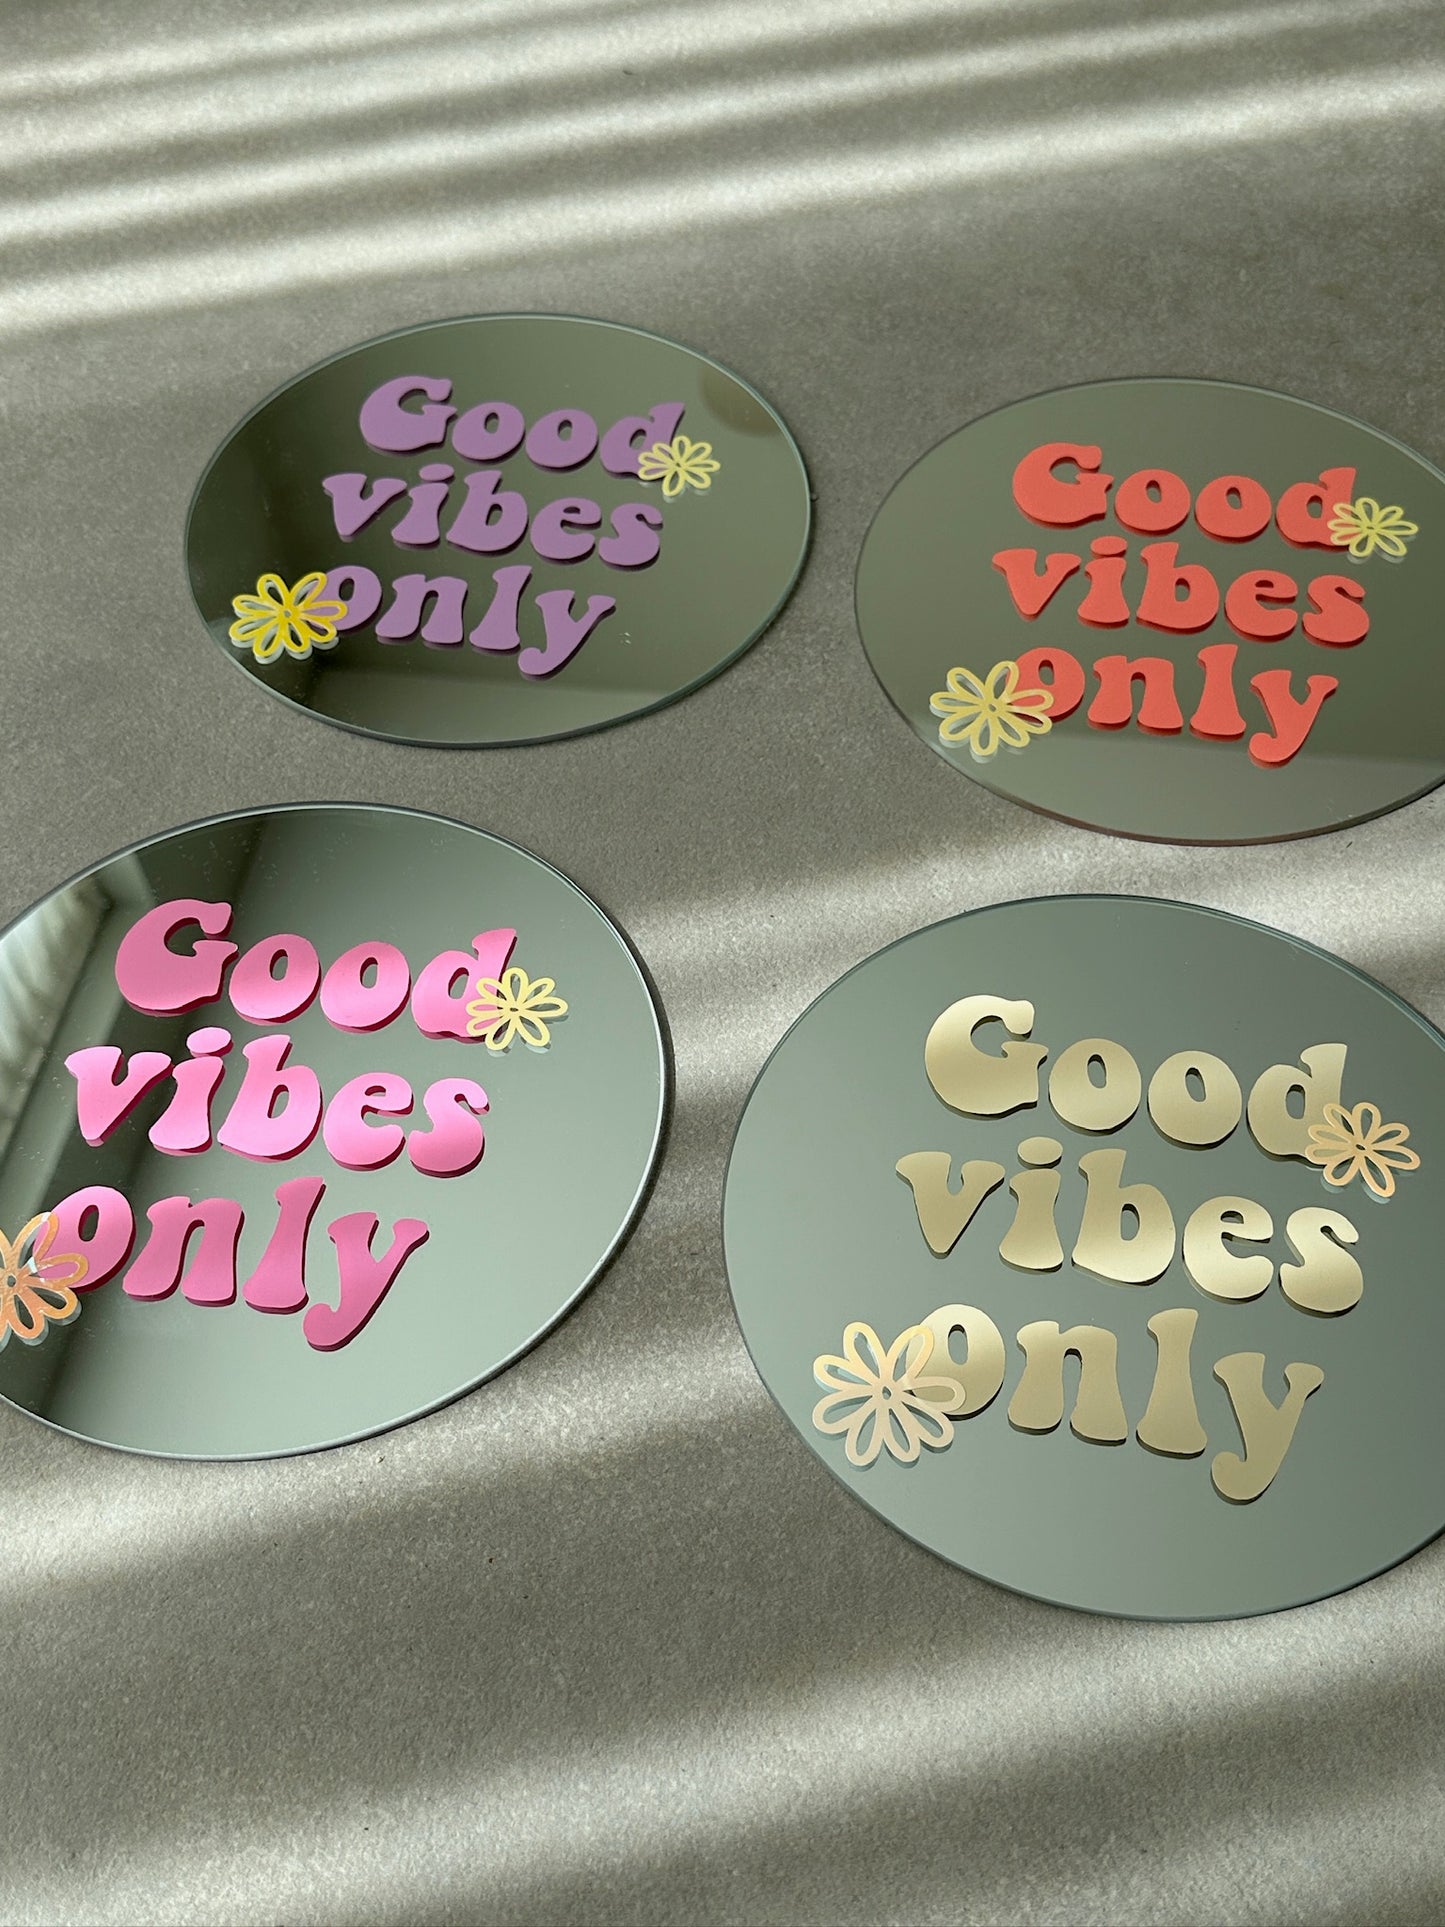 Good vibes only mirror peach